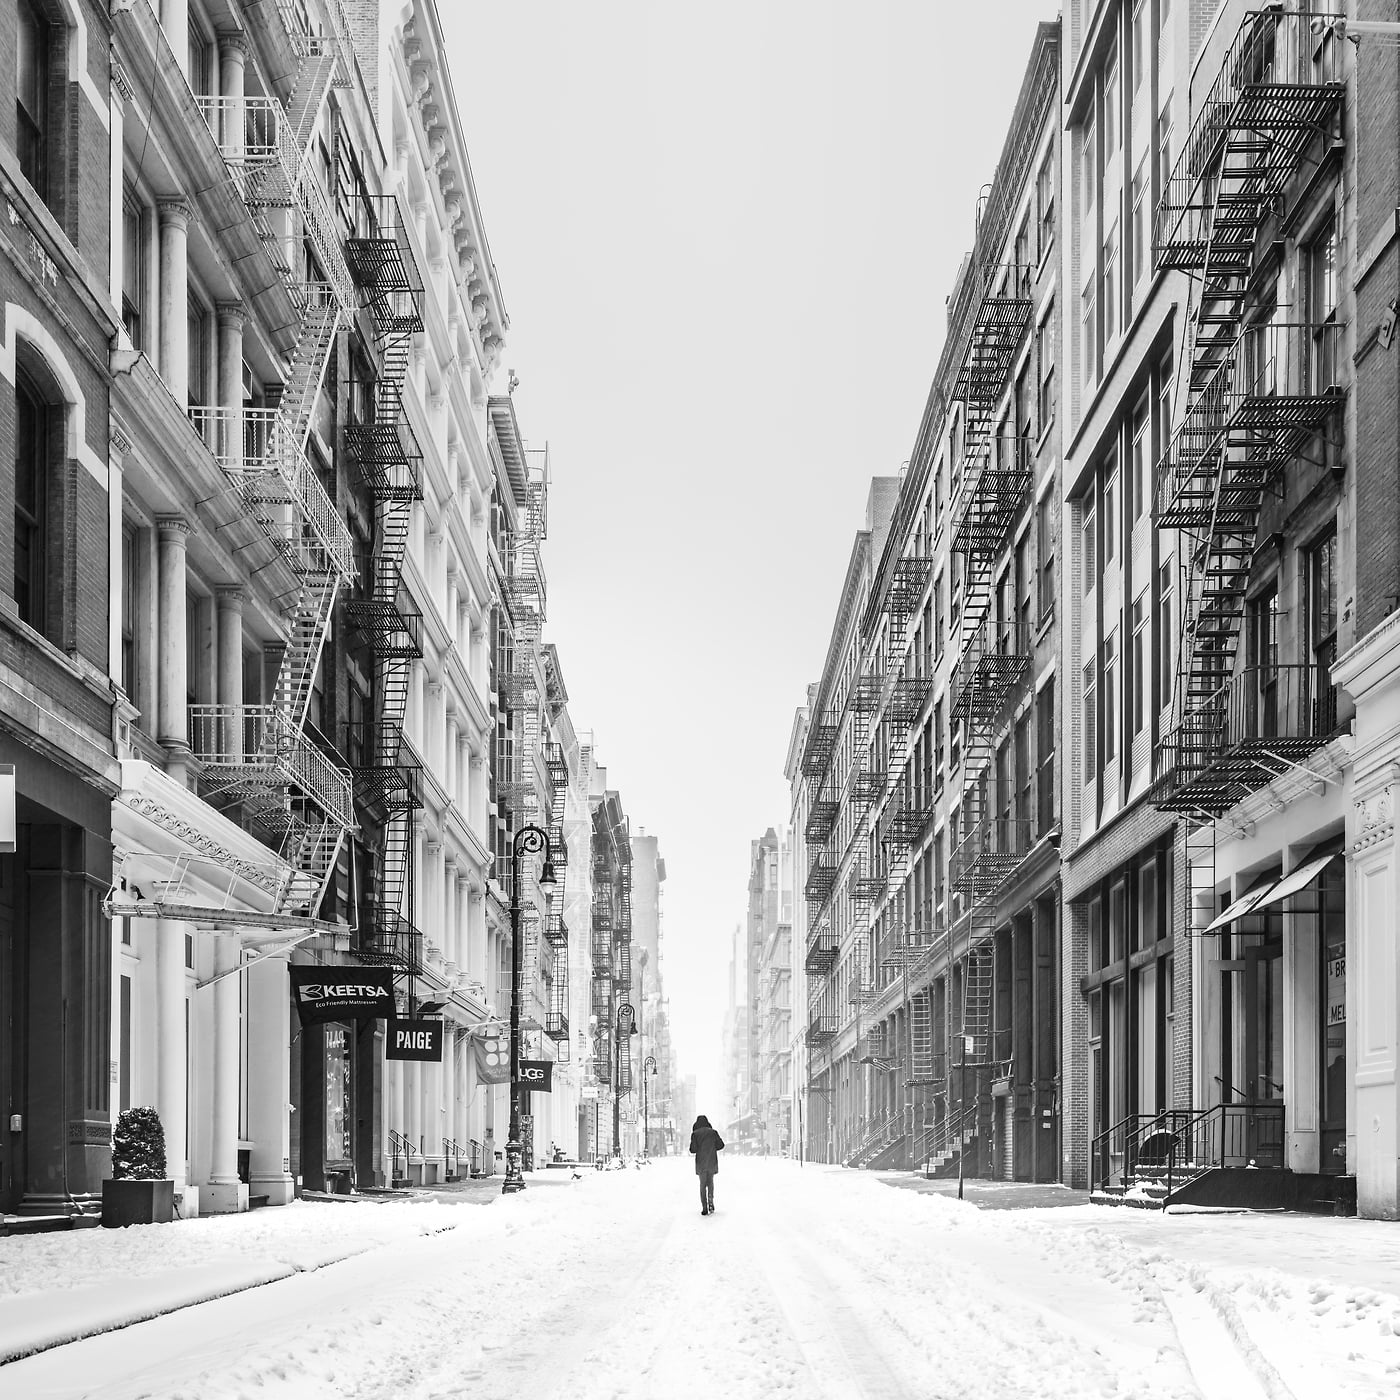 141 megapixels! A very high definition, large-format VAST photo print of Mercer Street in SoHo in NYC in winter snow; black and white fine art street photo created by Dan Piech in New York City